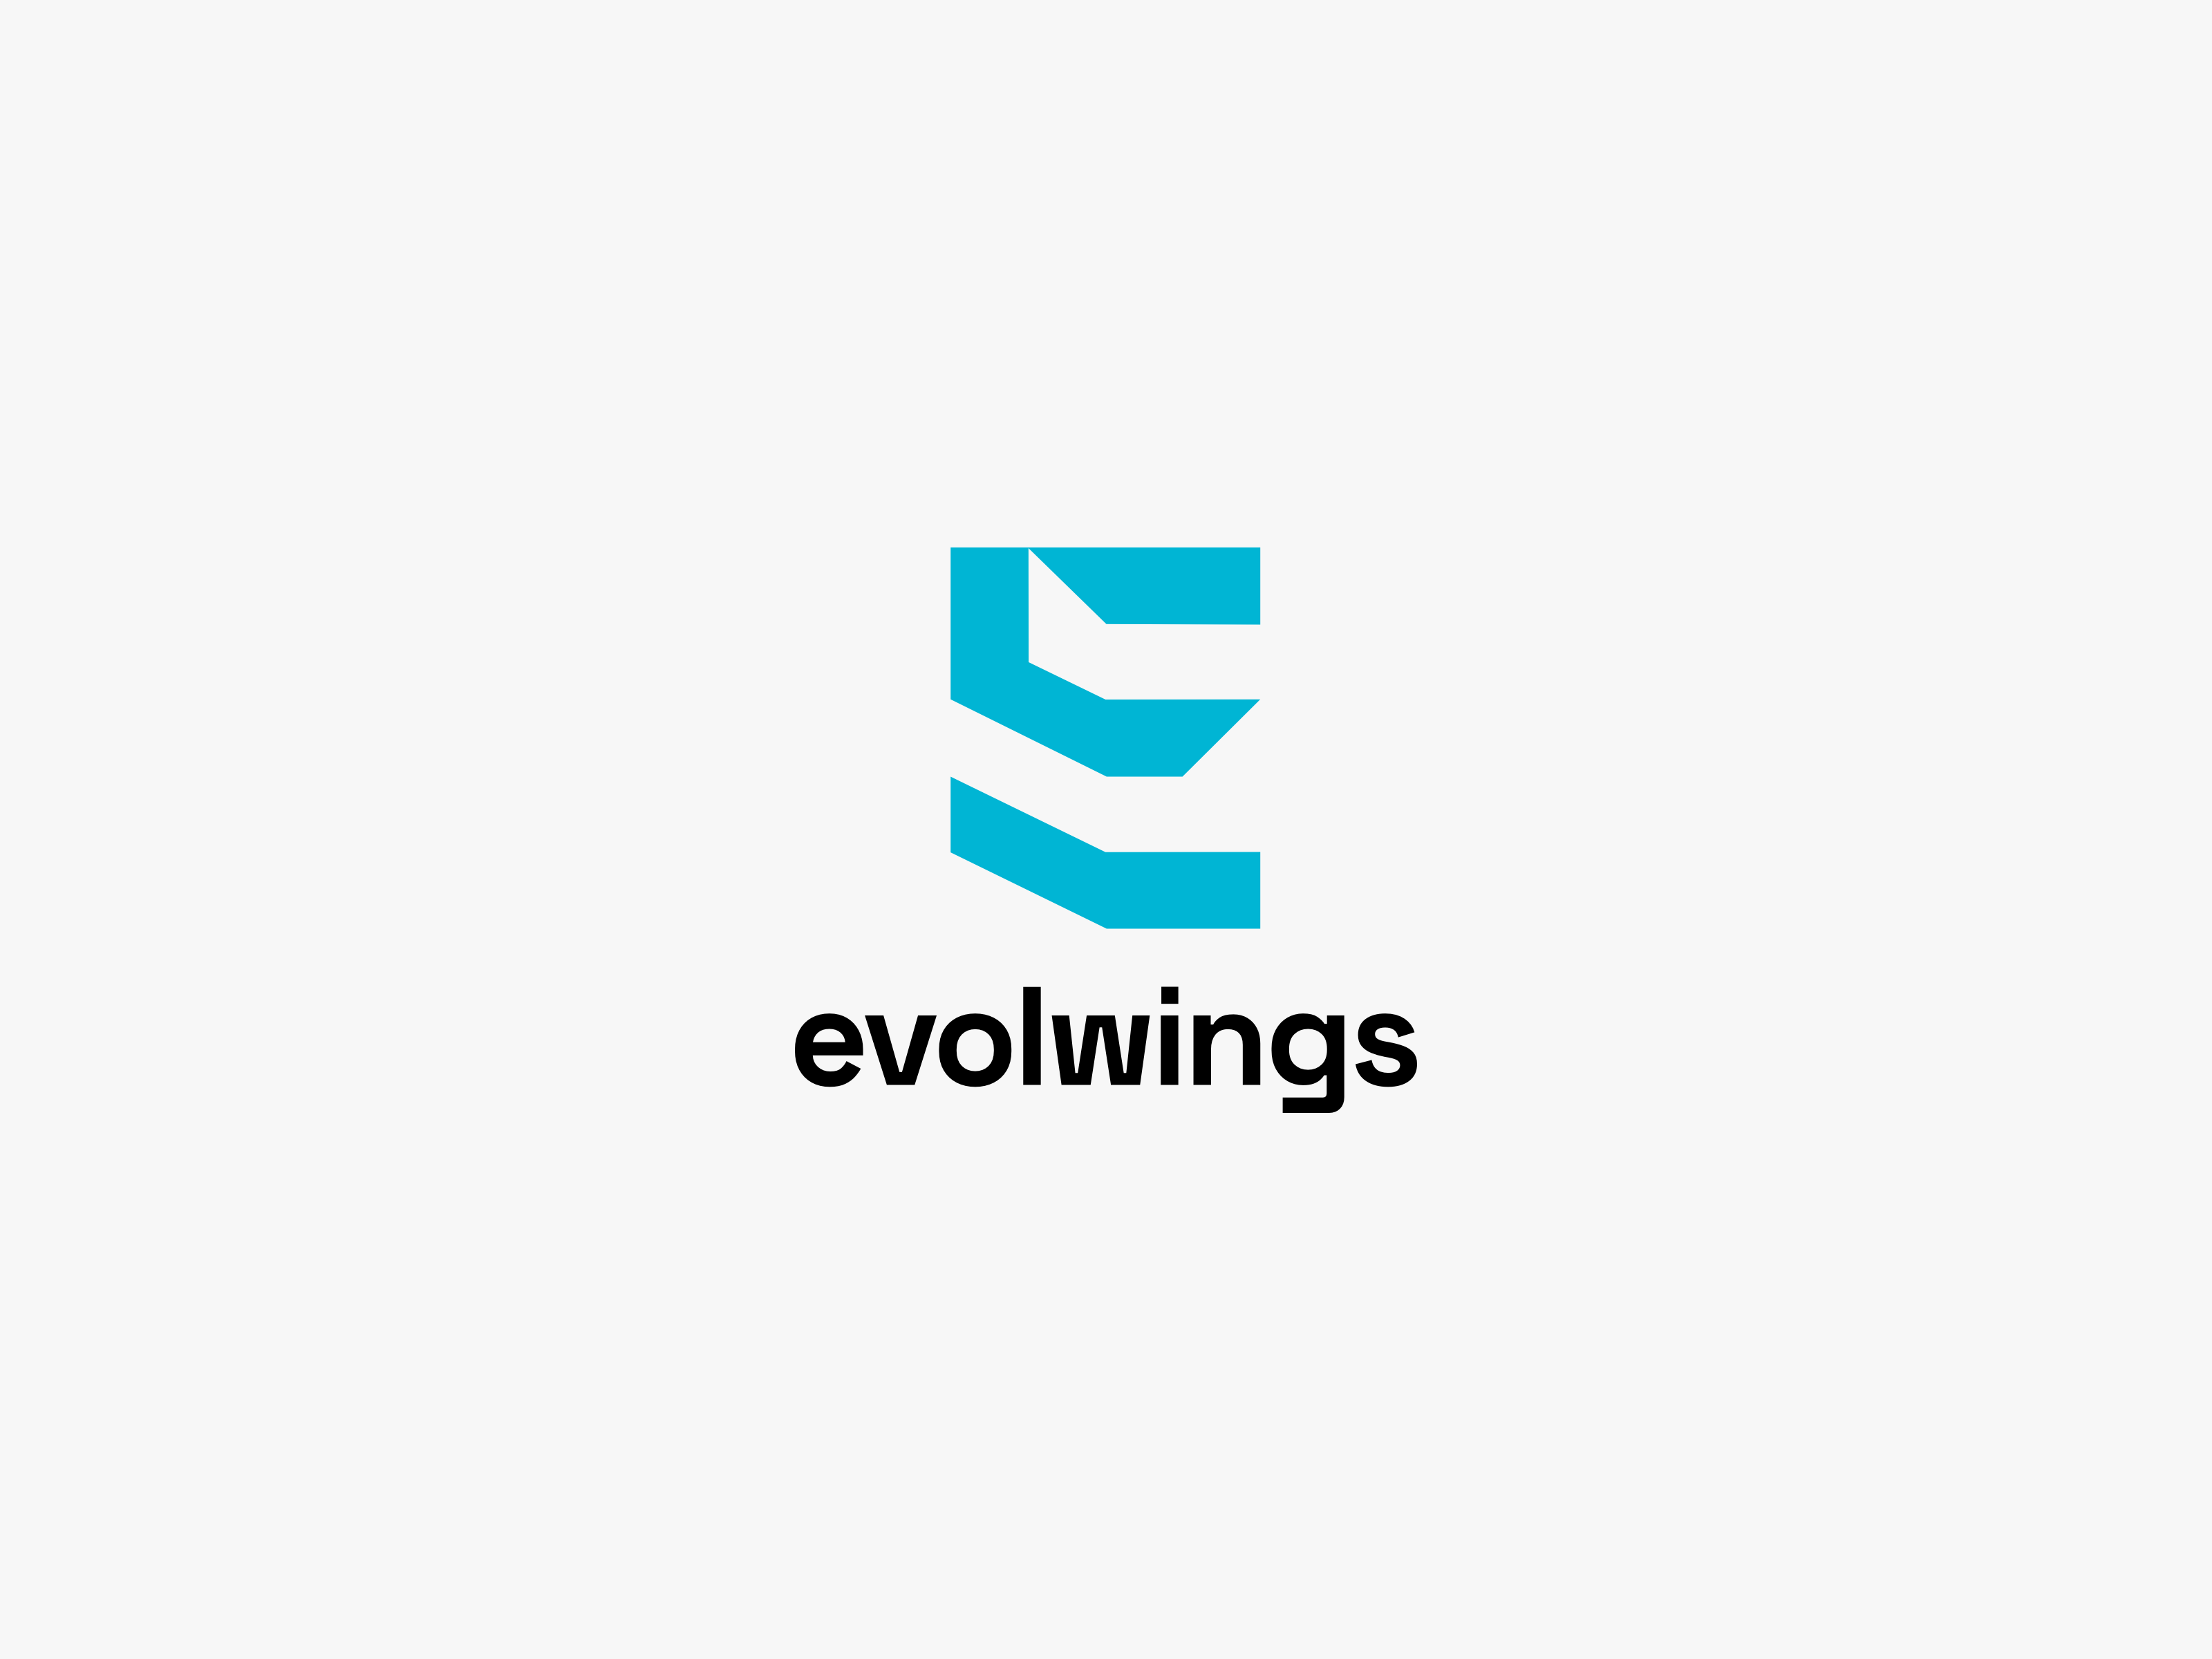 evolwings - brand identity